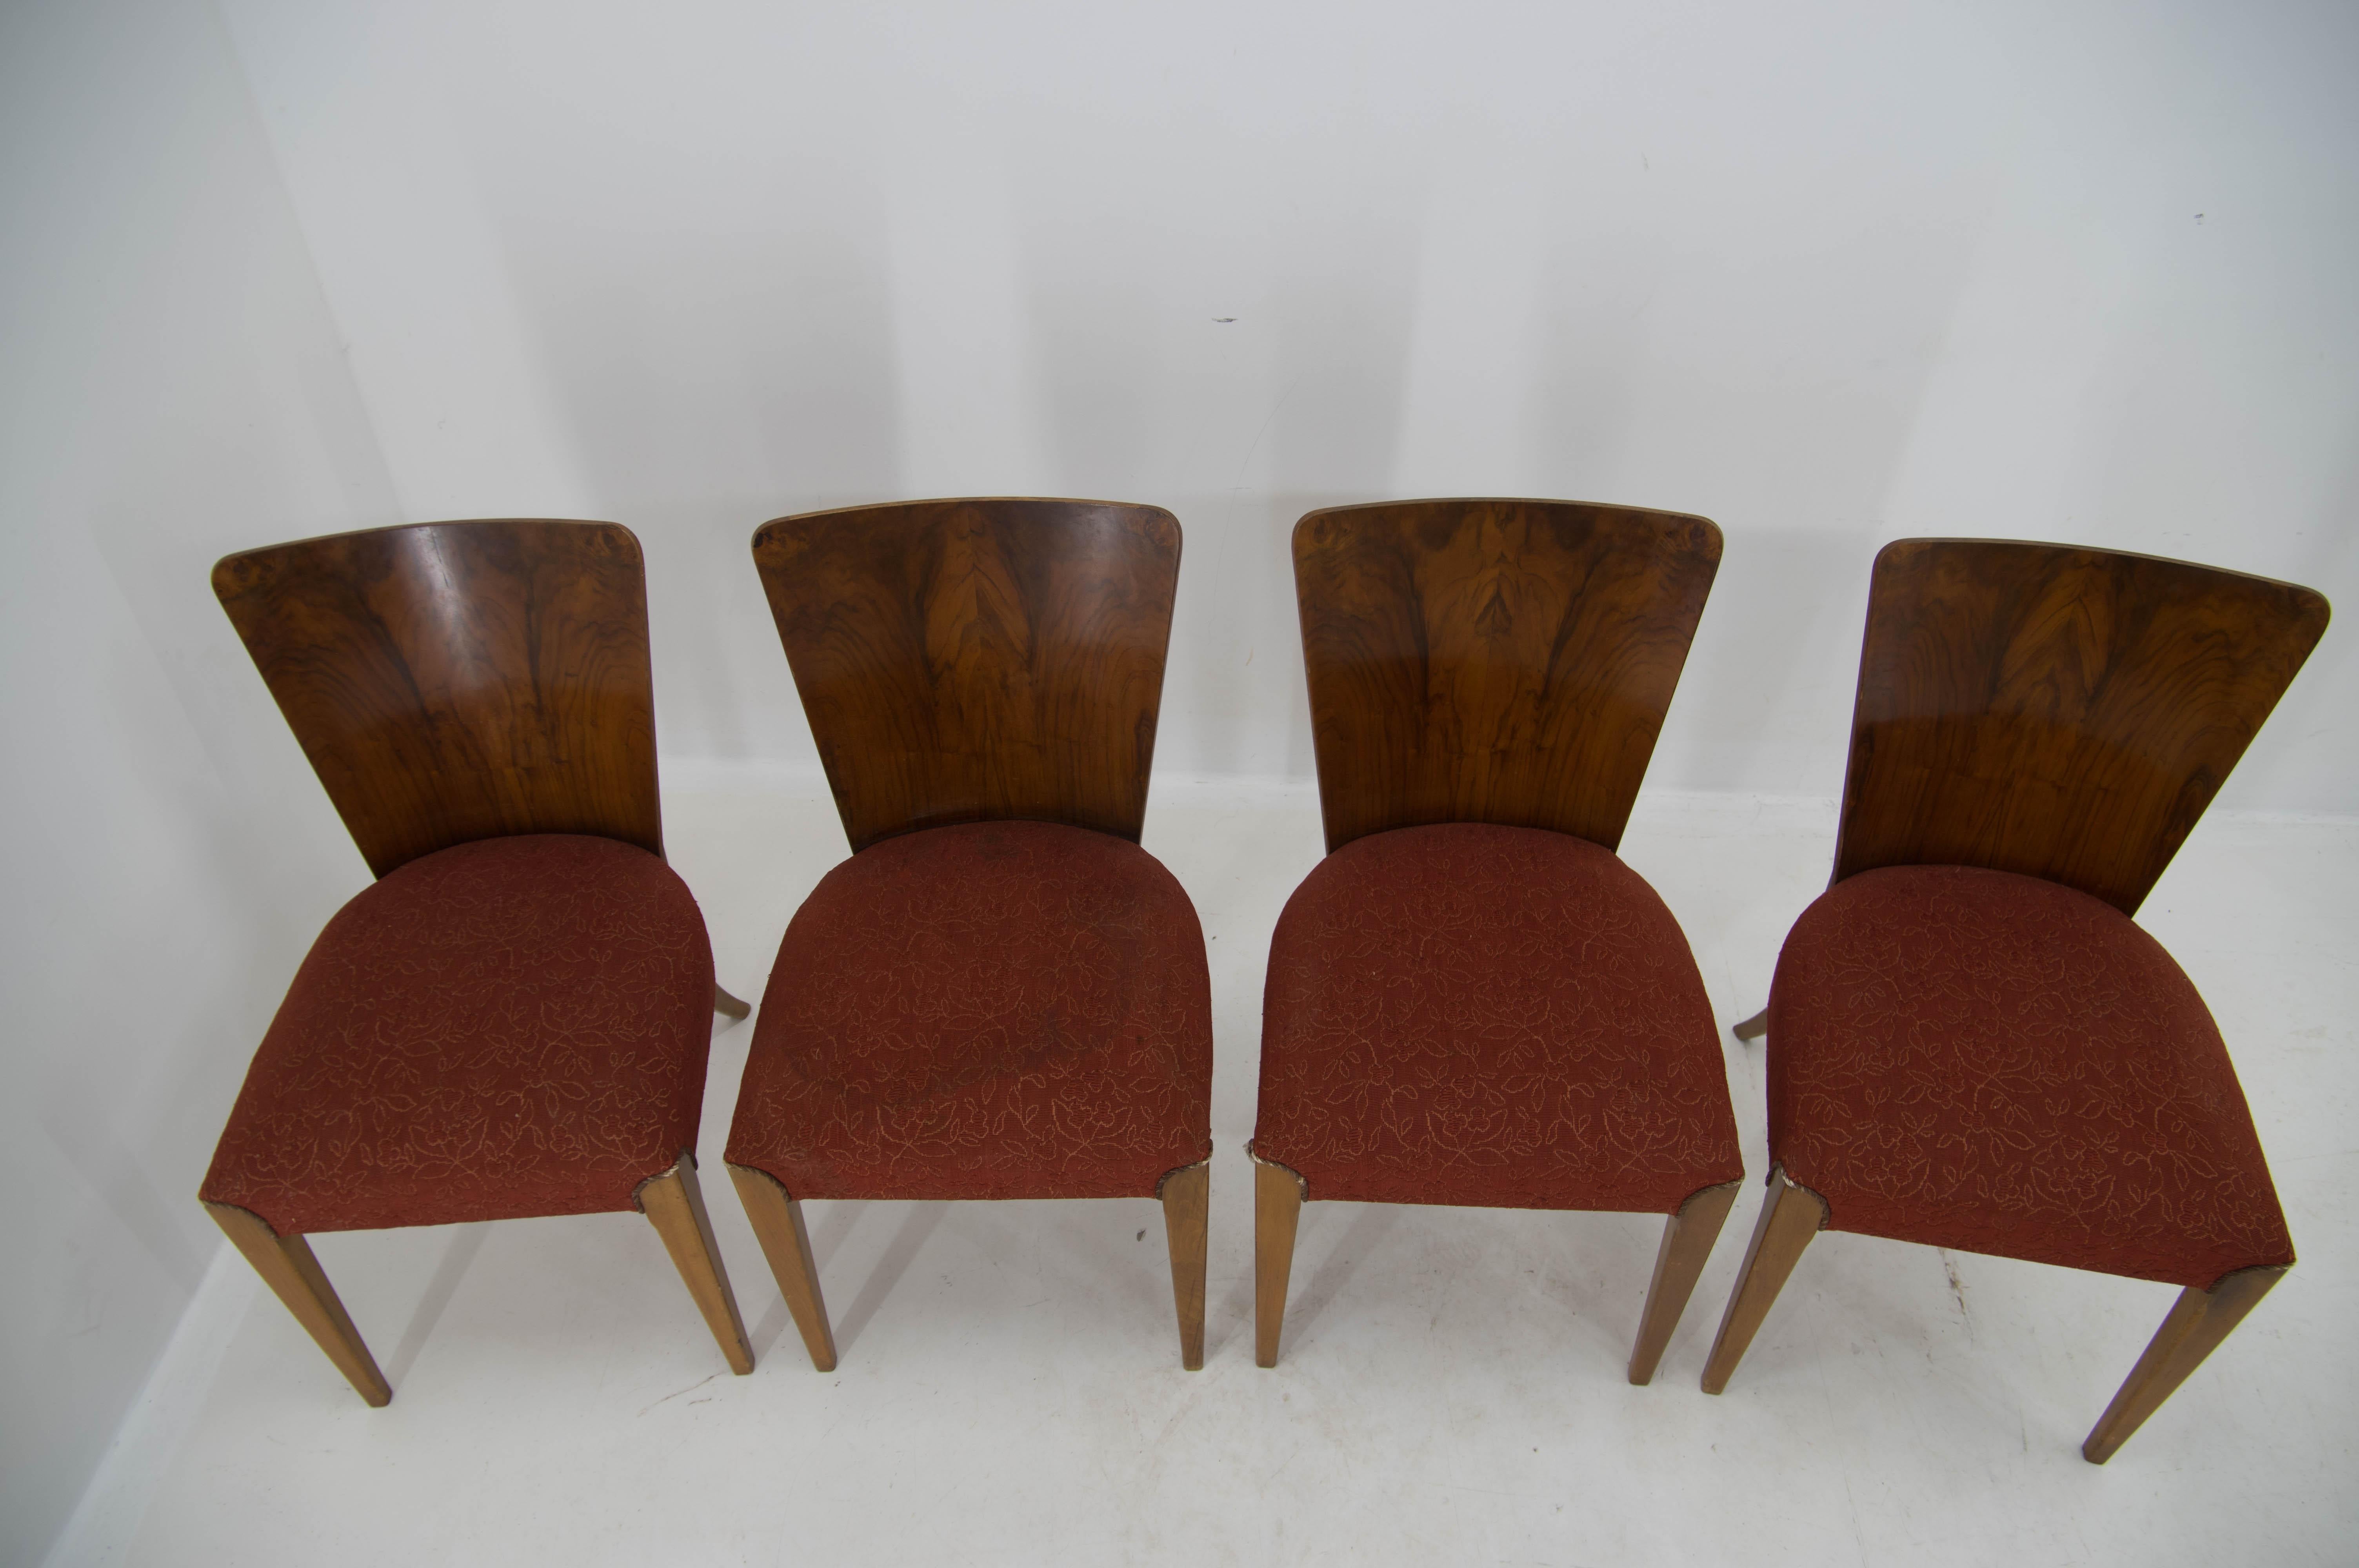 Czech Art Deco Dining Chairs H-214 by Jindrich Halabala for UP Závody, Set of 4